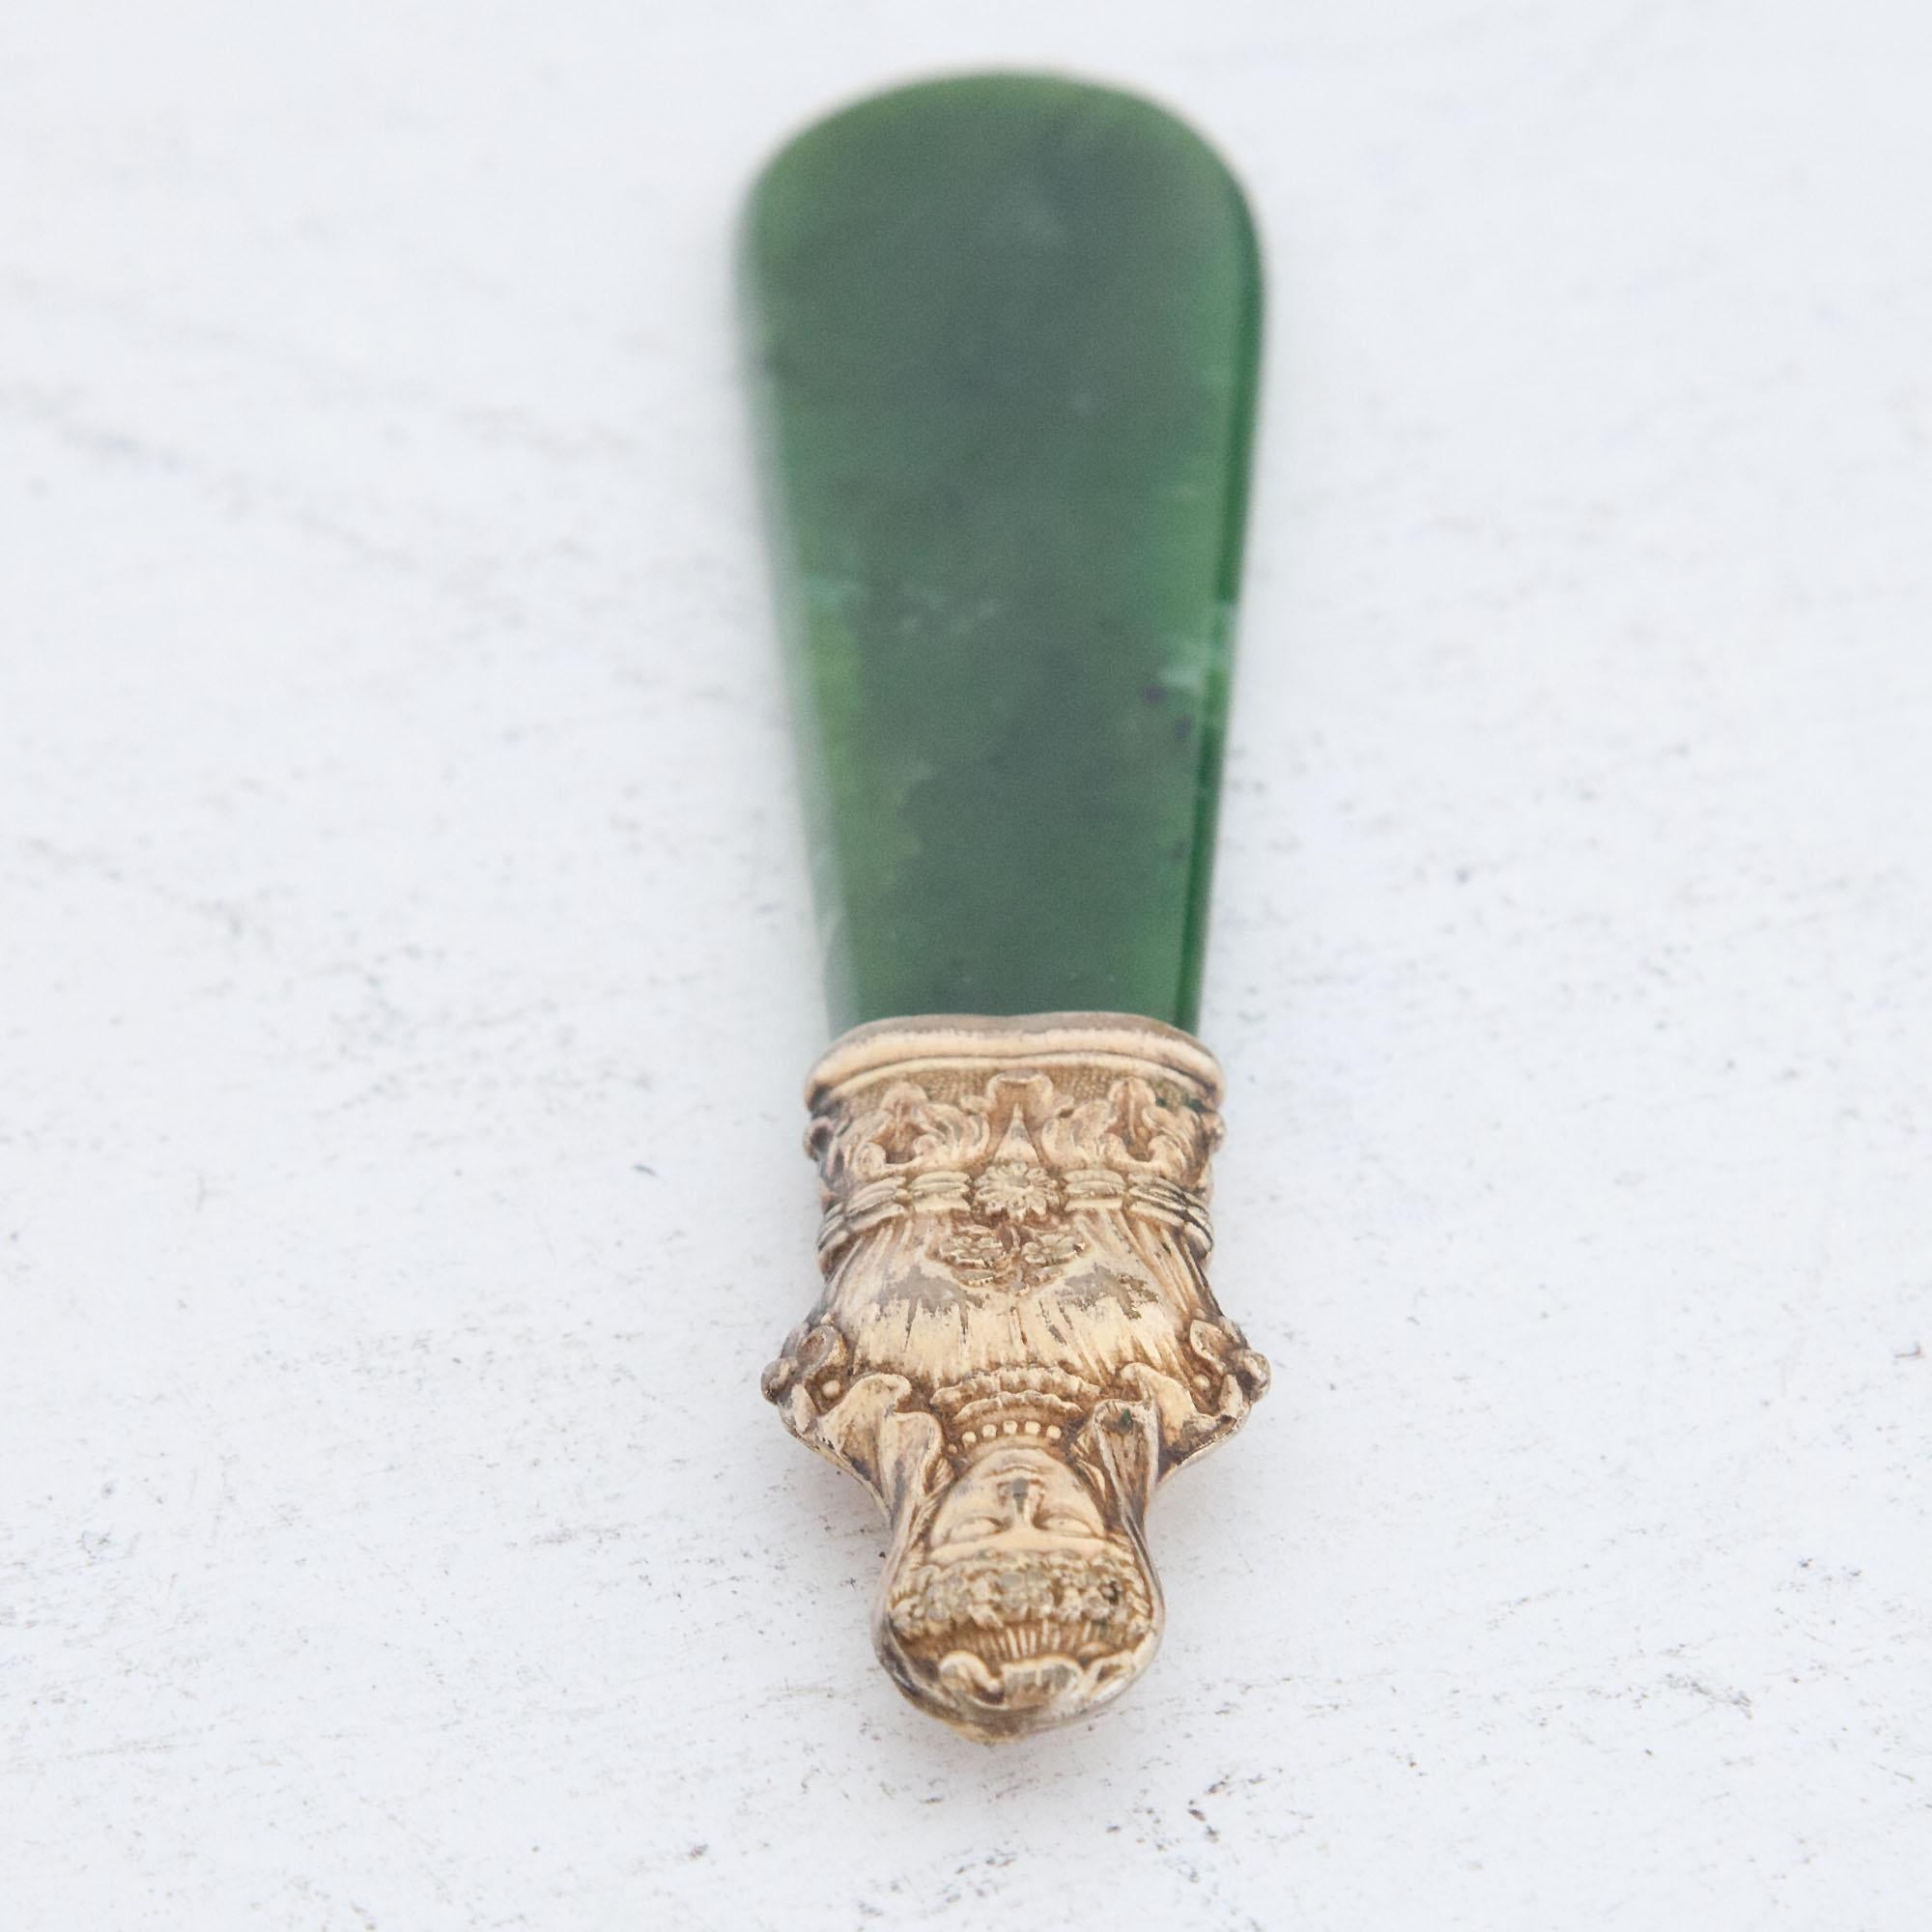 Empire Nephrite Caviar Knife, Probably, Russia, First Half of the 19th Century